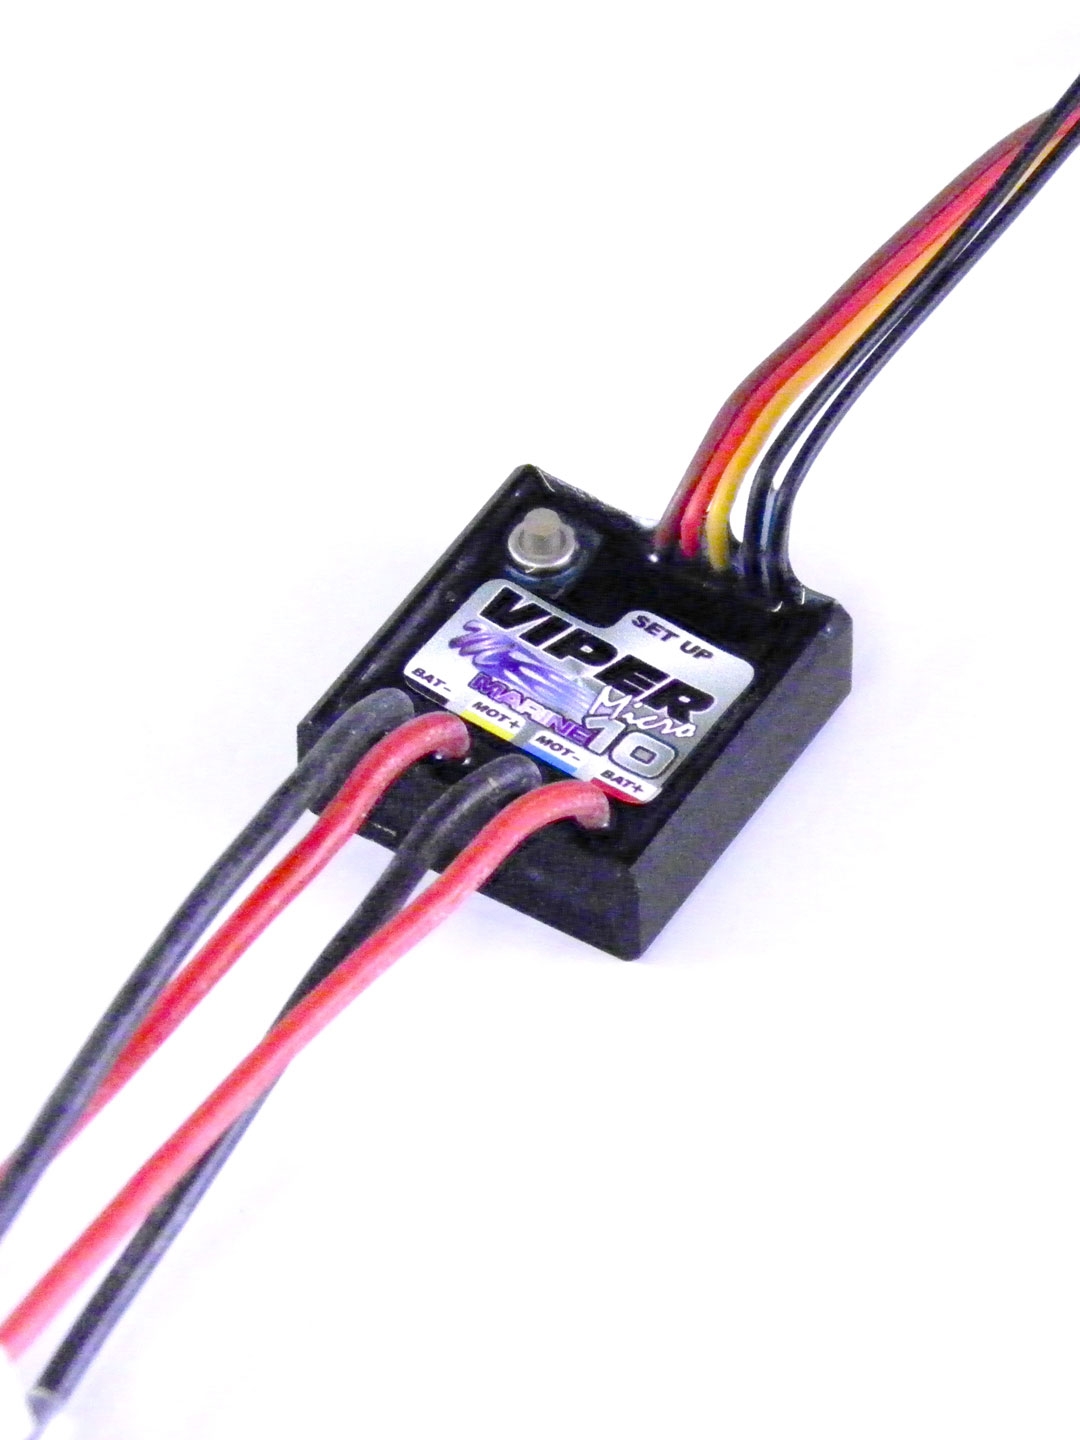 10A micro brushed RC boat speed controller